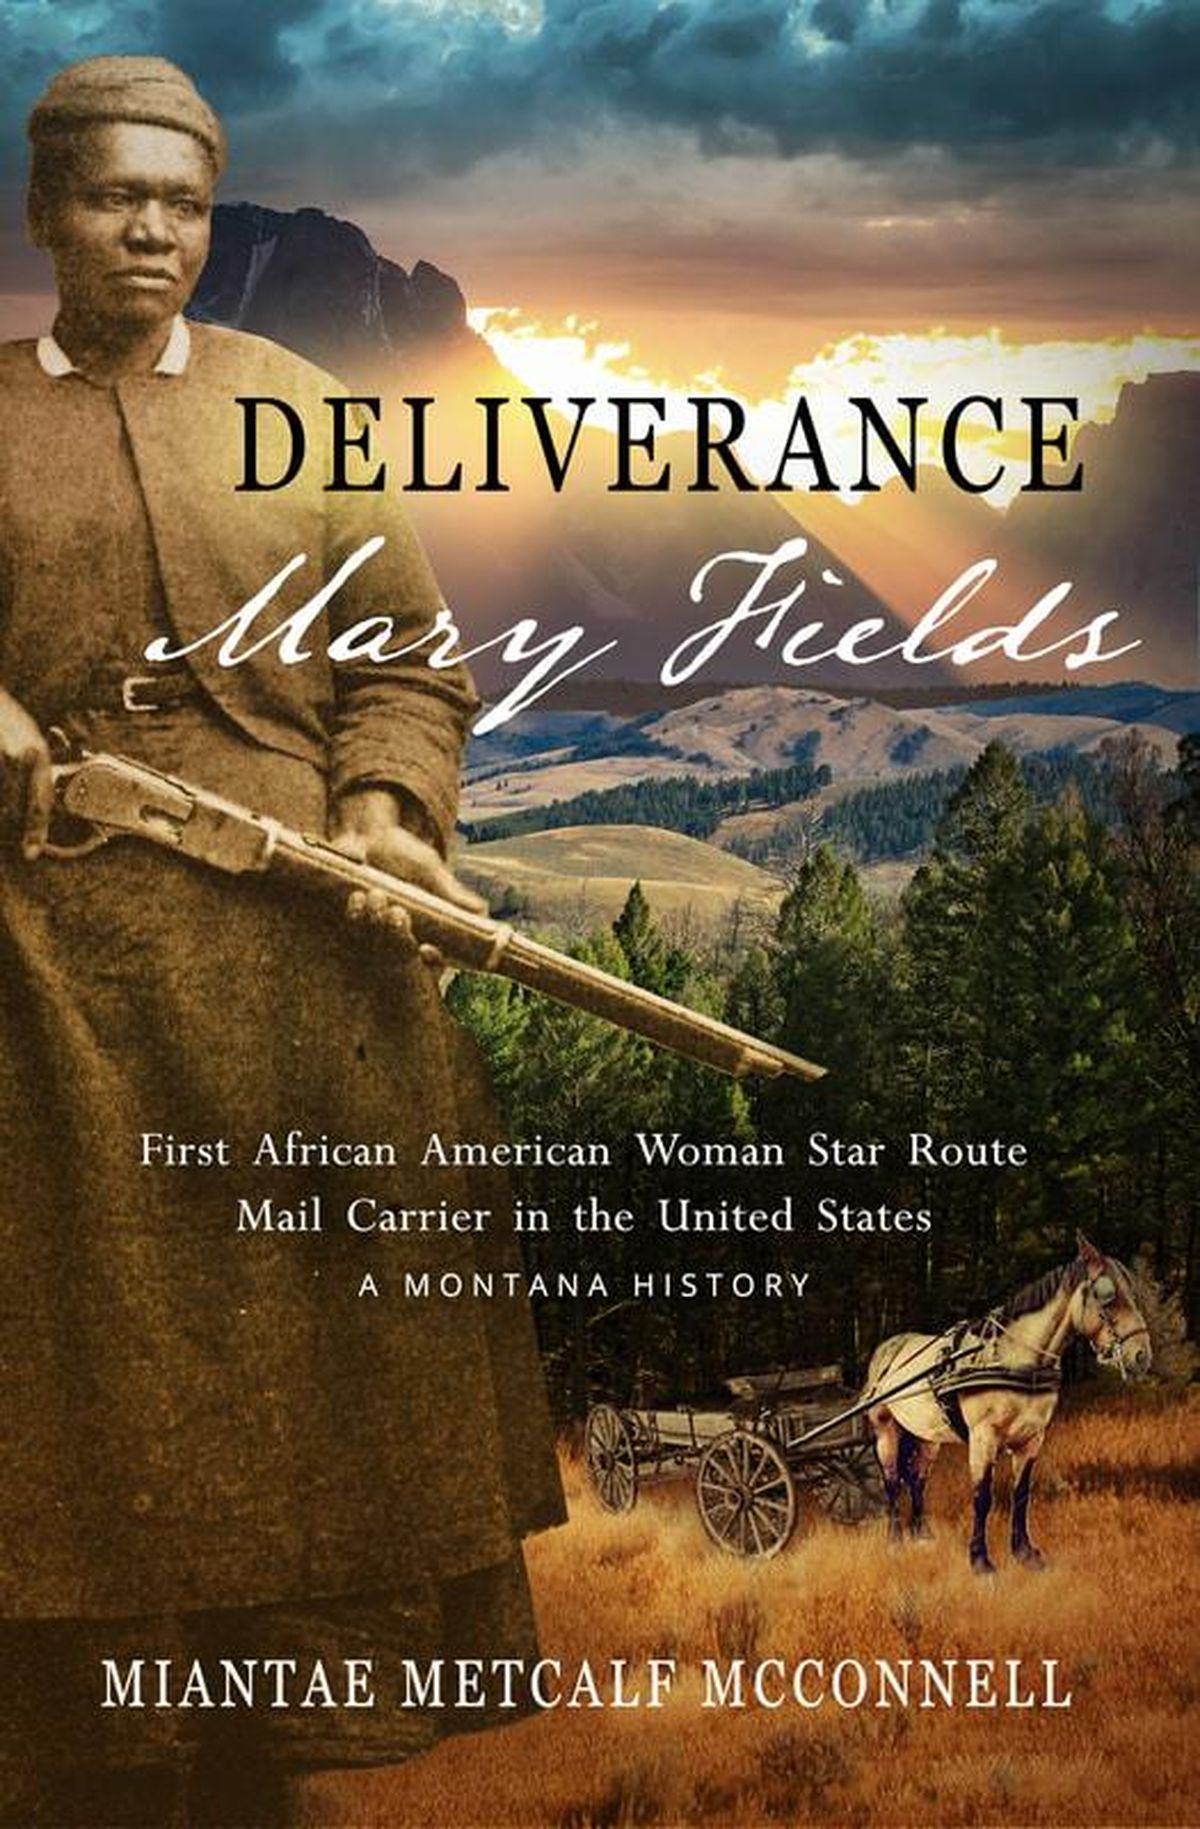 “Deliverance Mary Fields, First African American Woman Star Route Mail Carrier in the United States: A Montana History” is available at Auntie’s Bookstore and online through huzzahpublishing.com. (Courtesy photo)